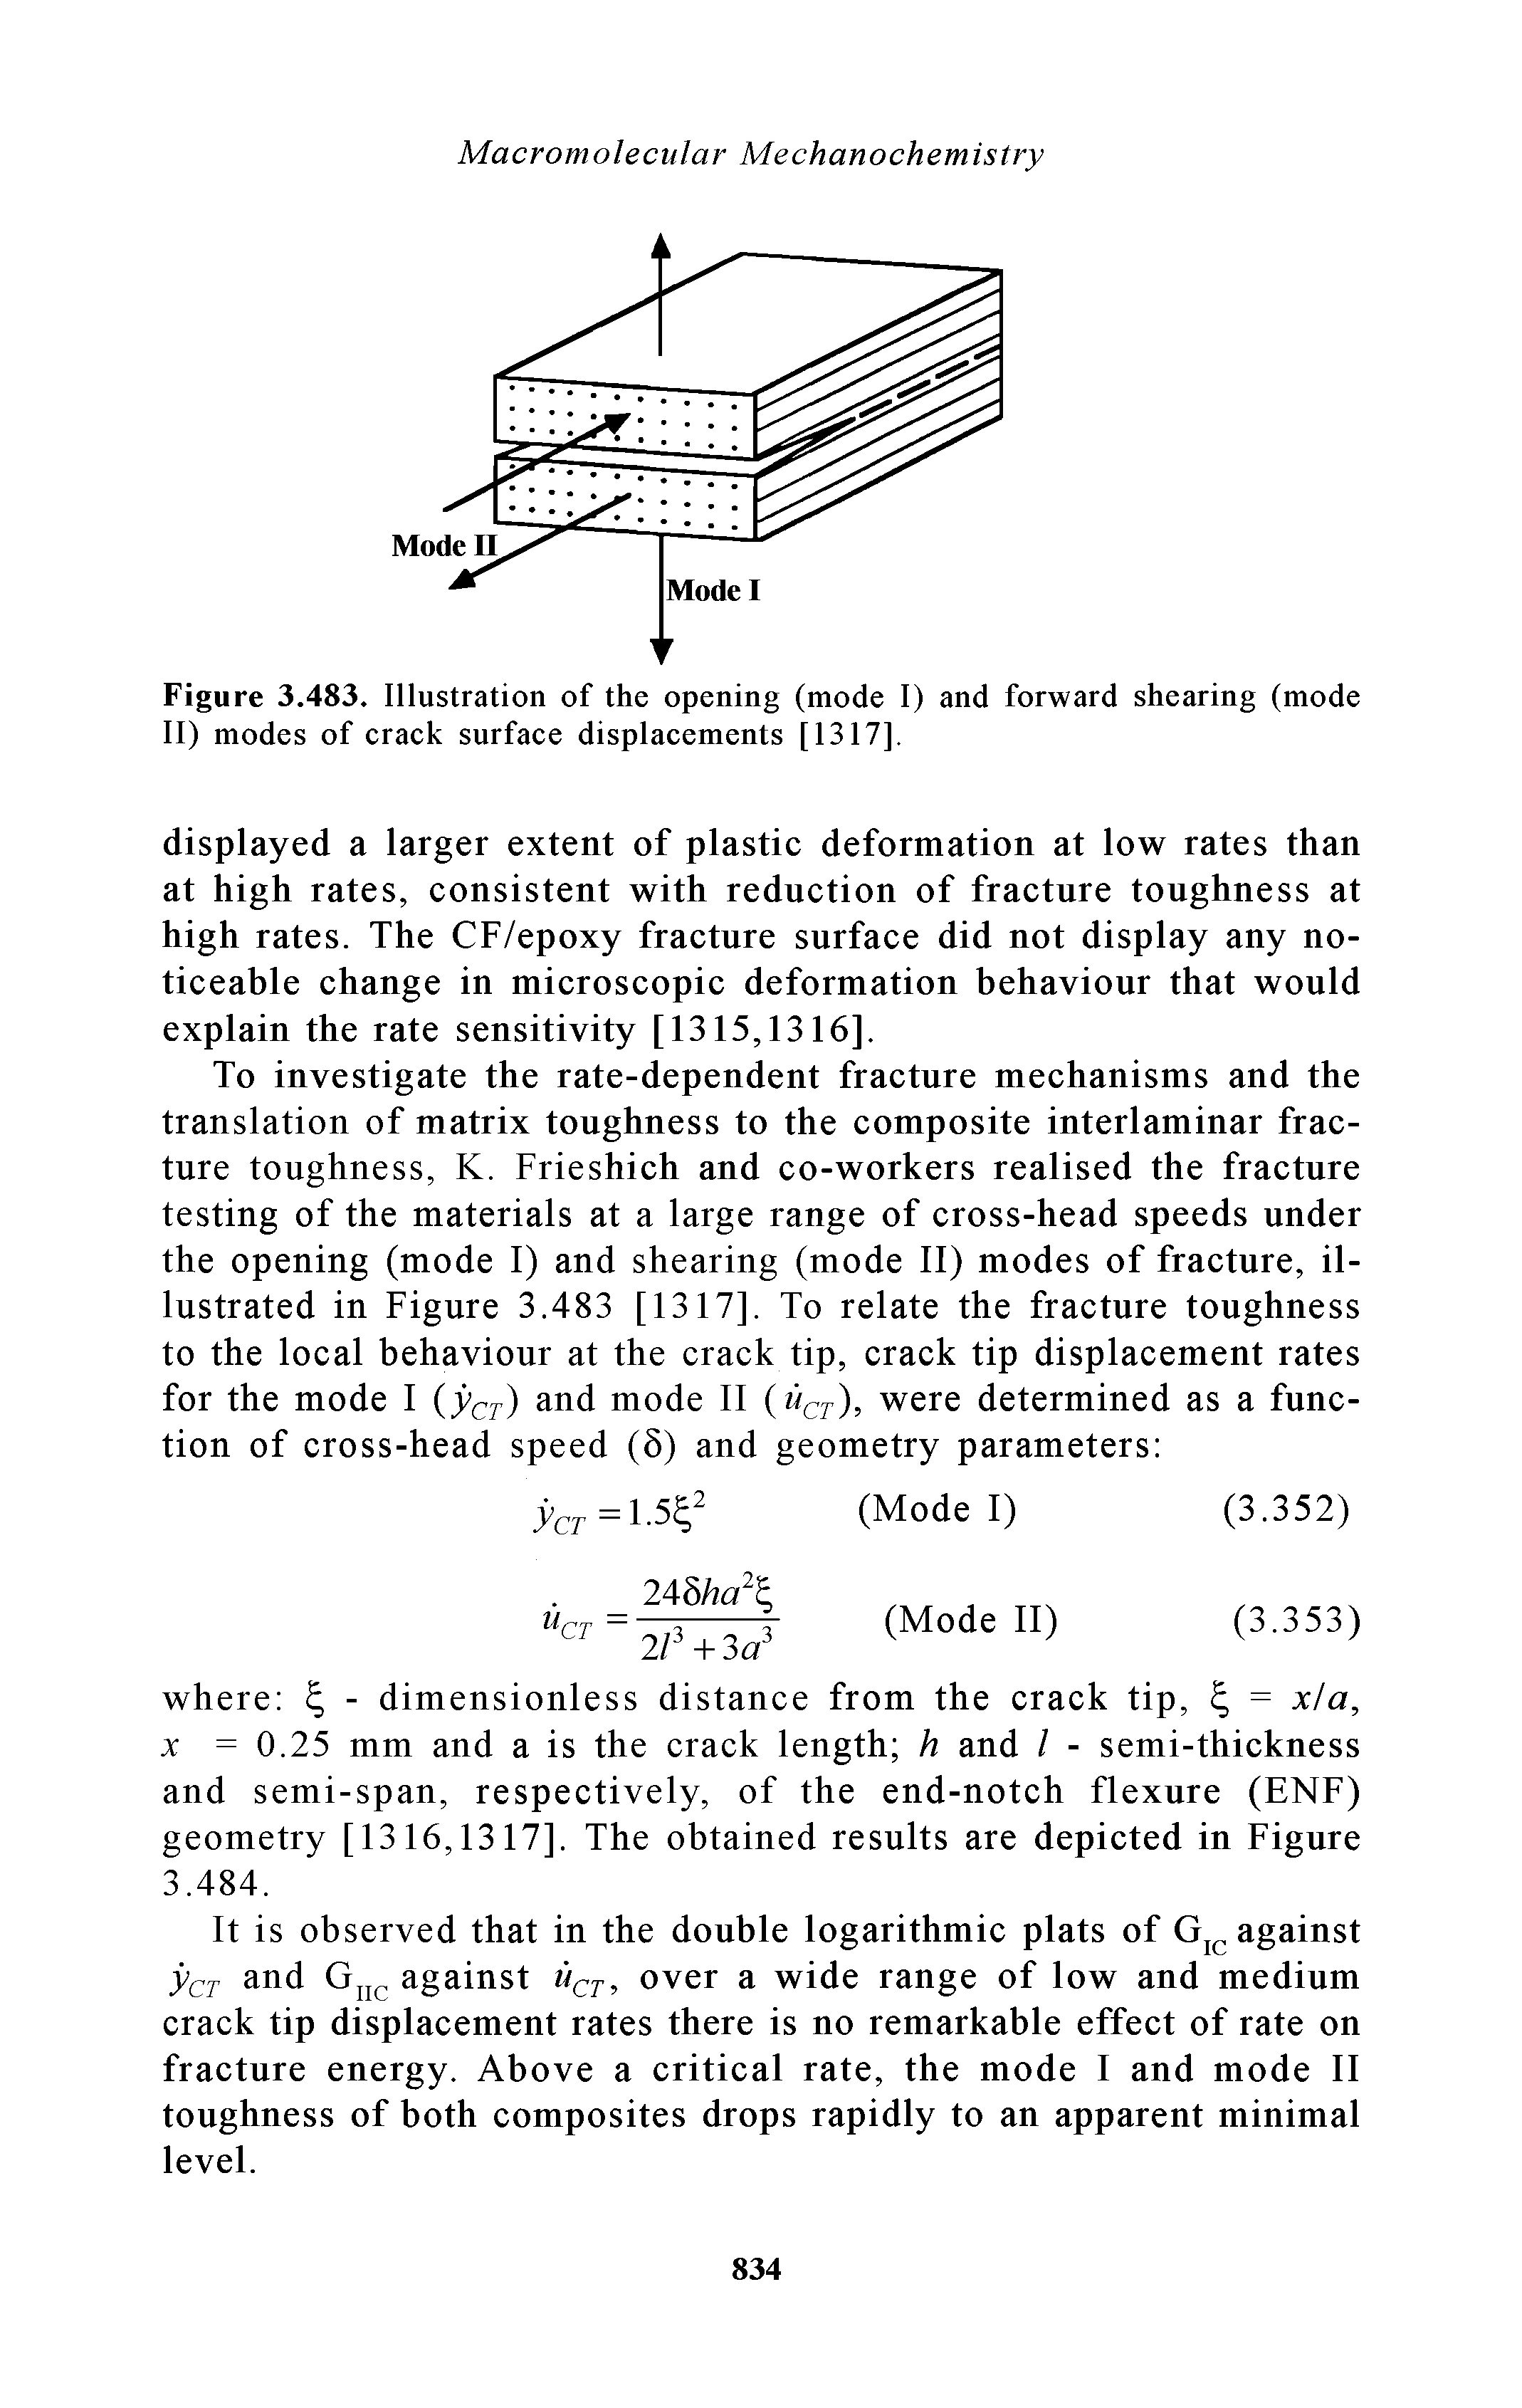 Figure 3.483. Illustration of the opening (mode I) and forward shearing (mode II) modes of crack surface displacements [1317],...